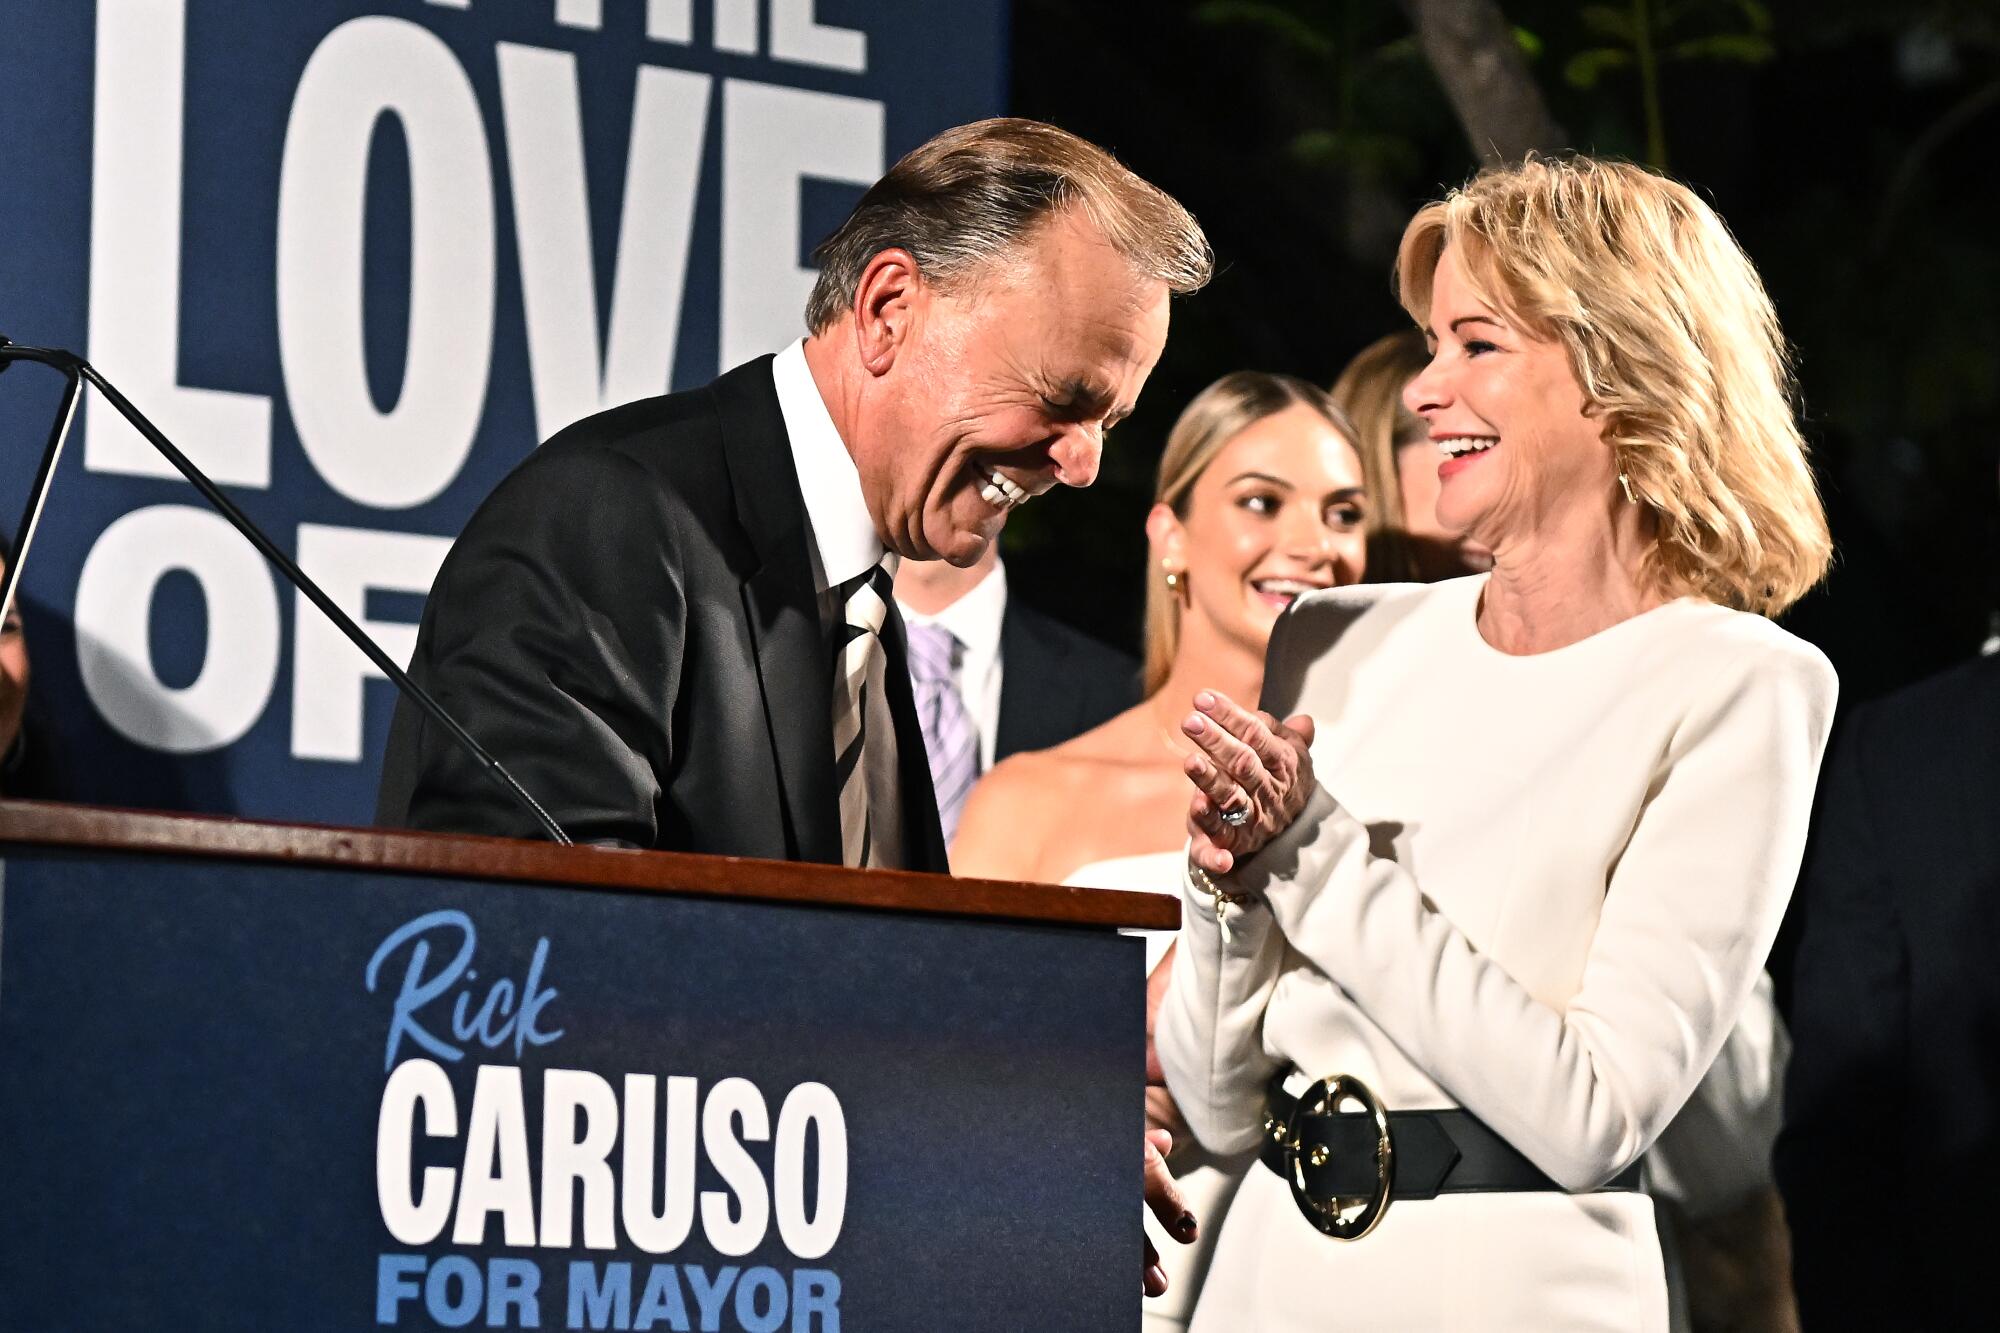 Rick Caruso and wife Tina laughing at an election event